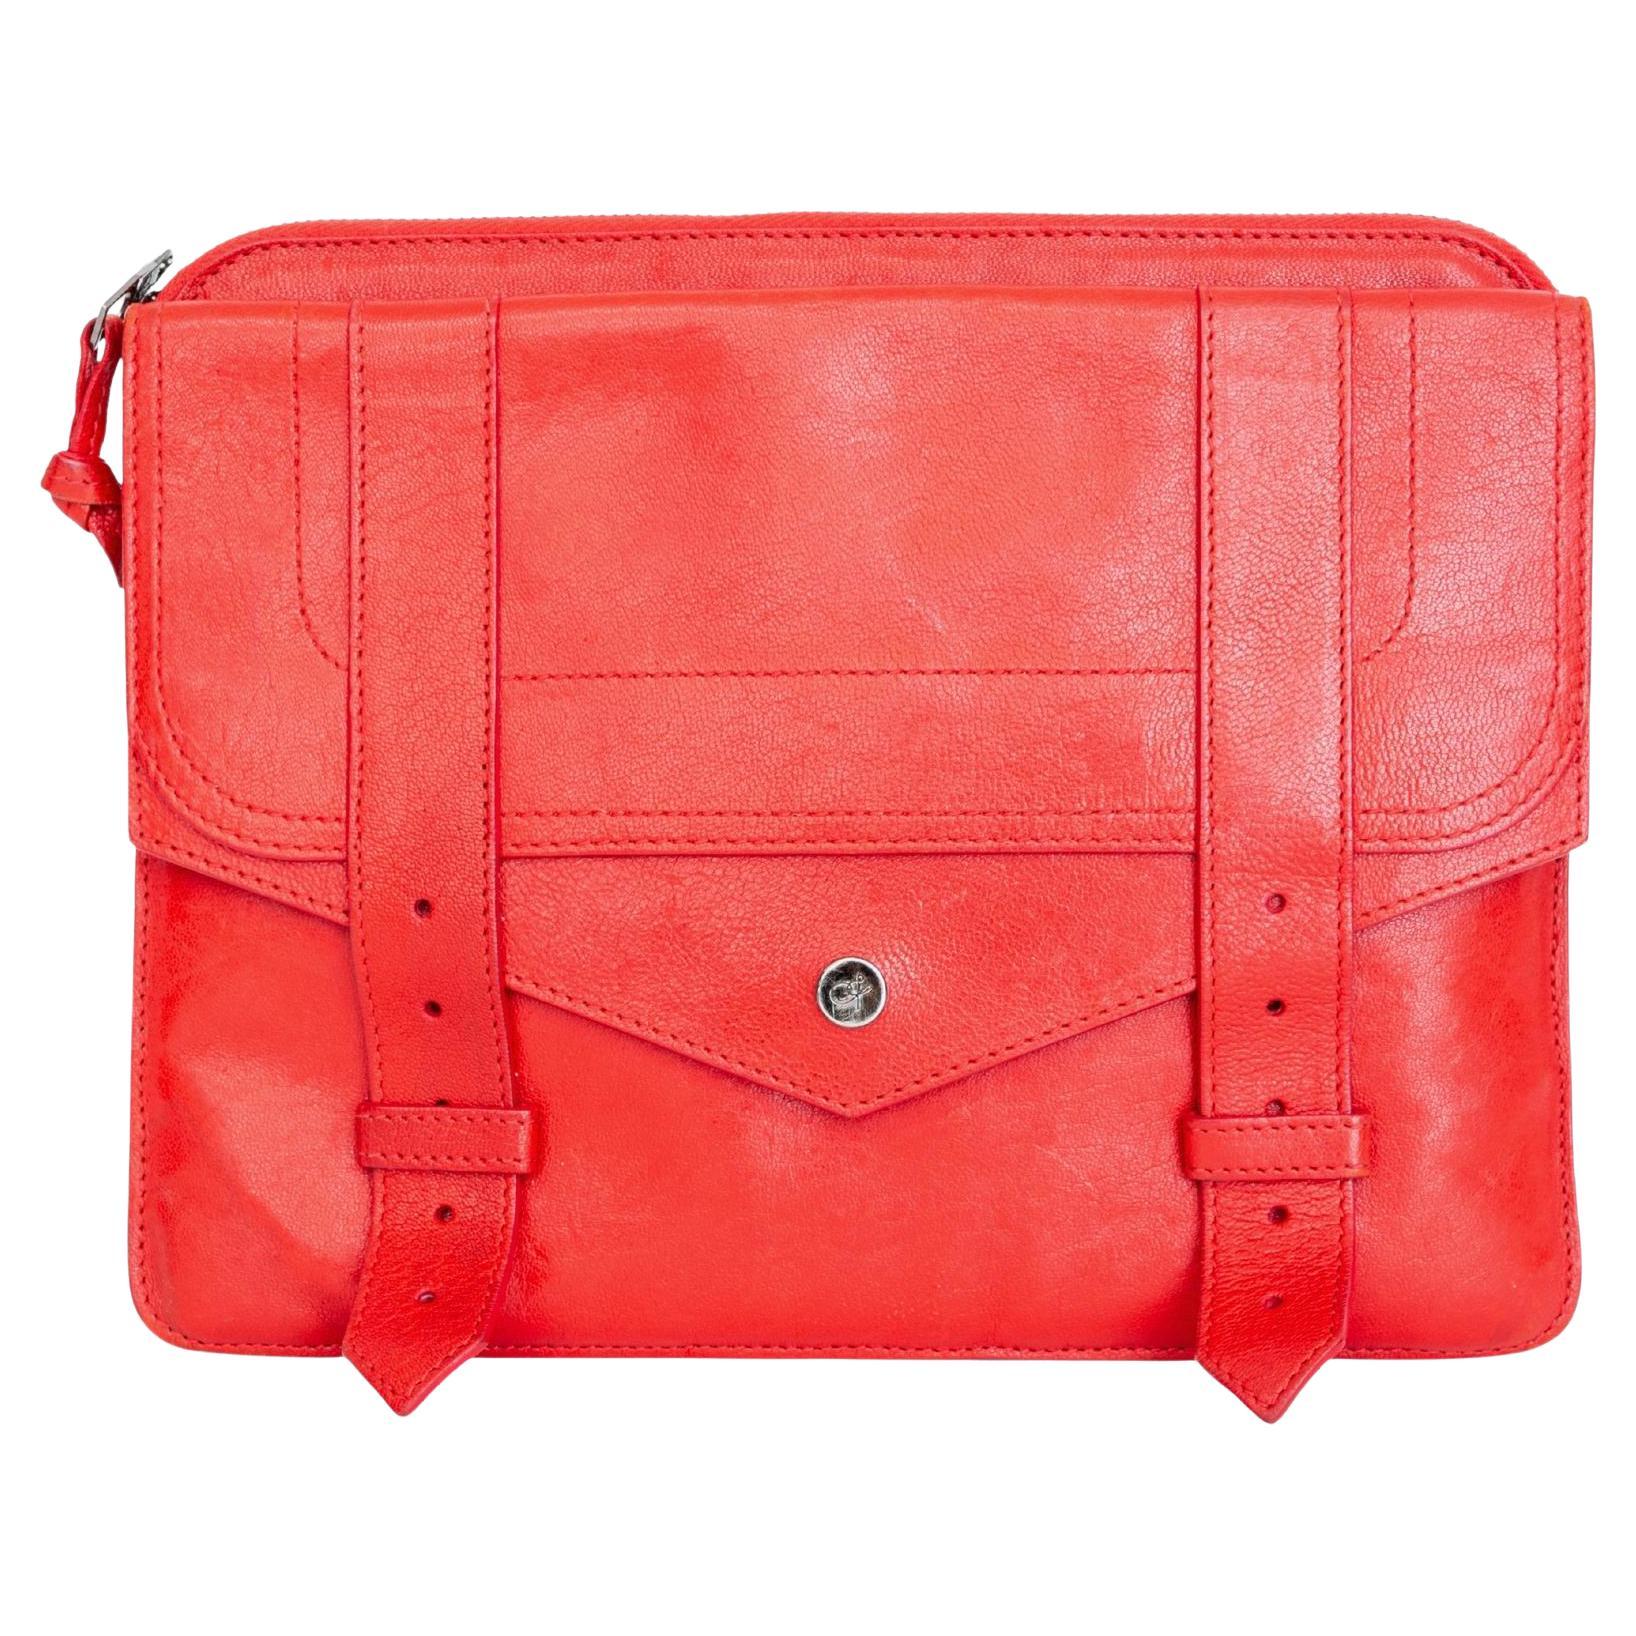 Proenza Schouler Red Leather iPad Case For Sale